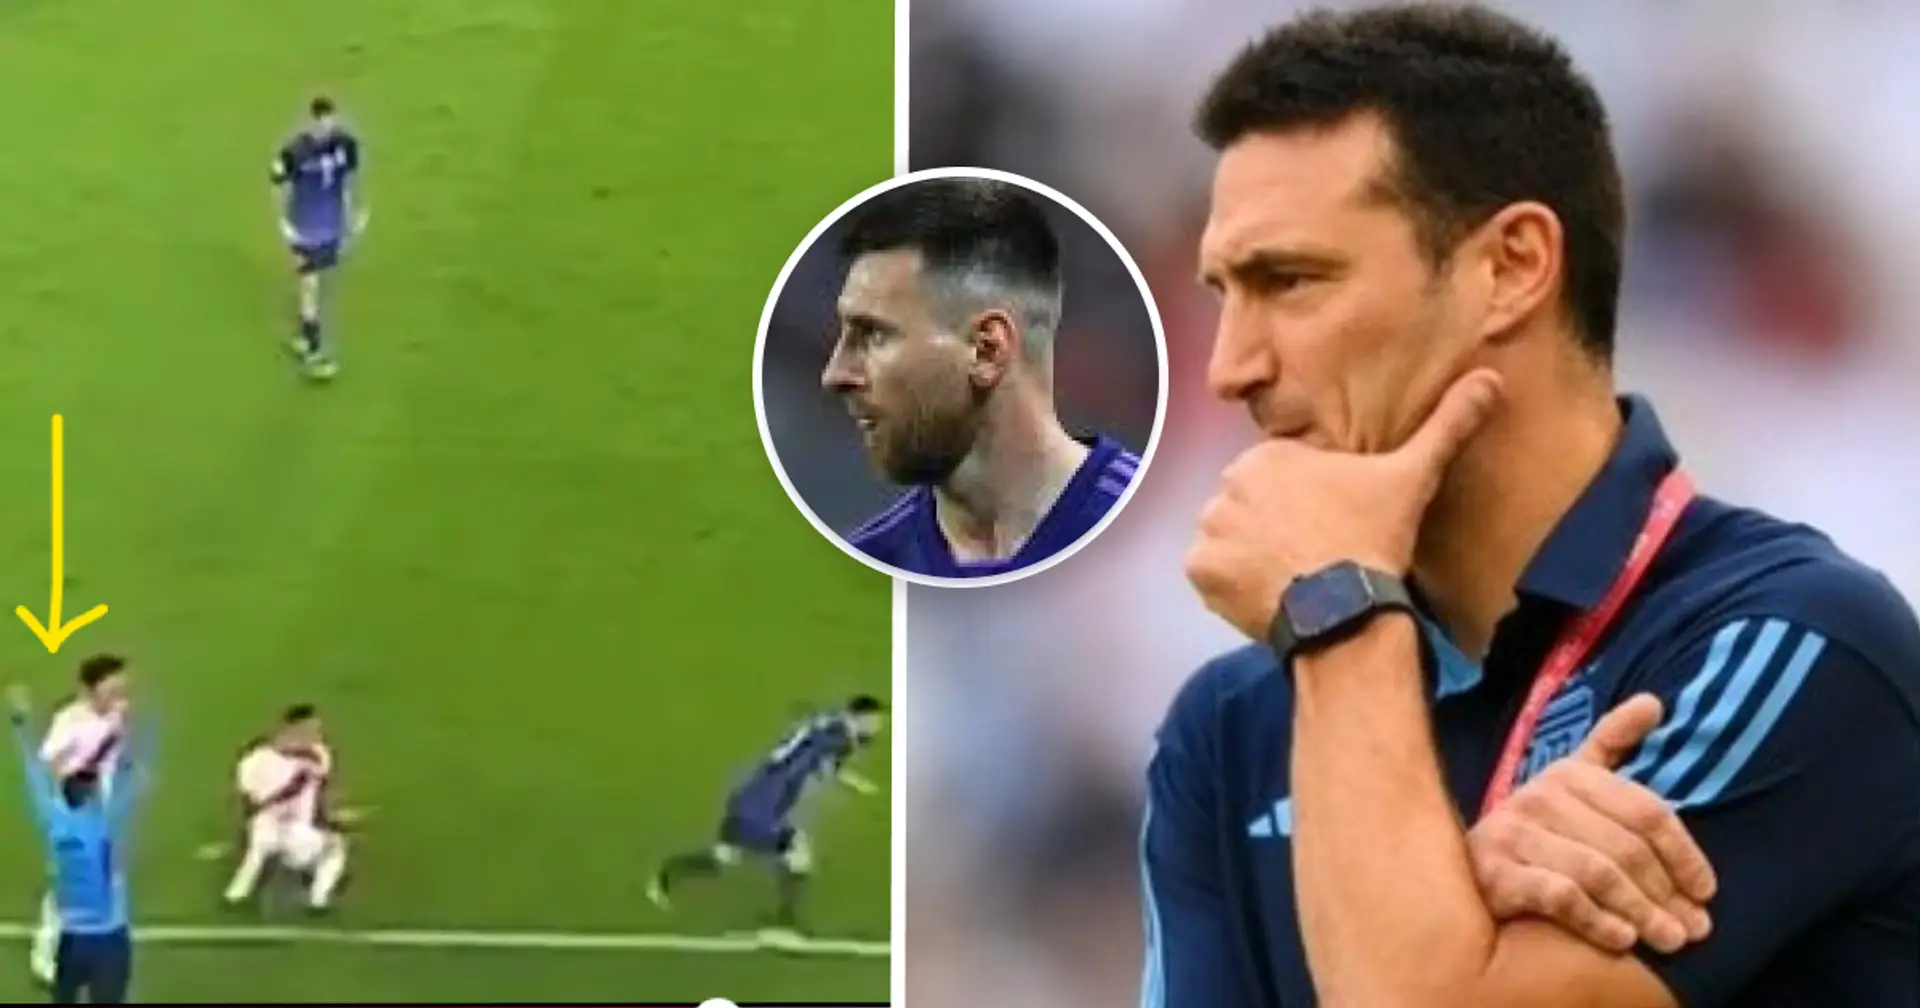 Spotted: Argentina coach celebrates Messi's insane dribbling like a goal – Leo left 2 players for dead